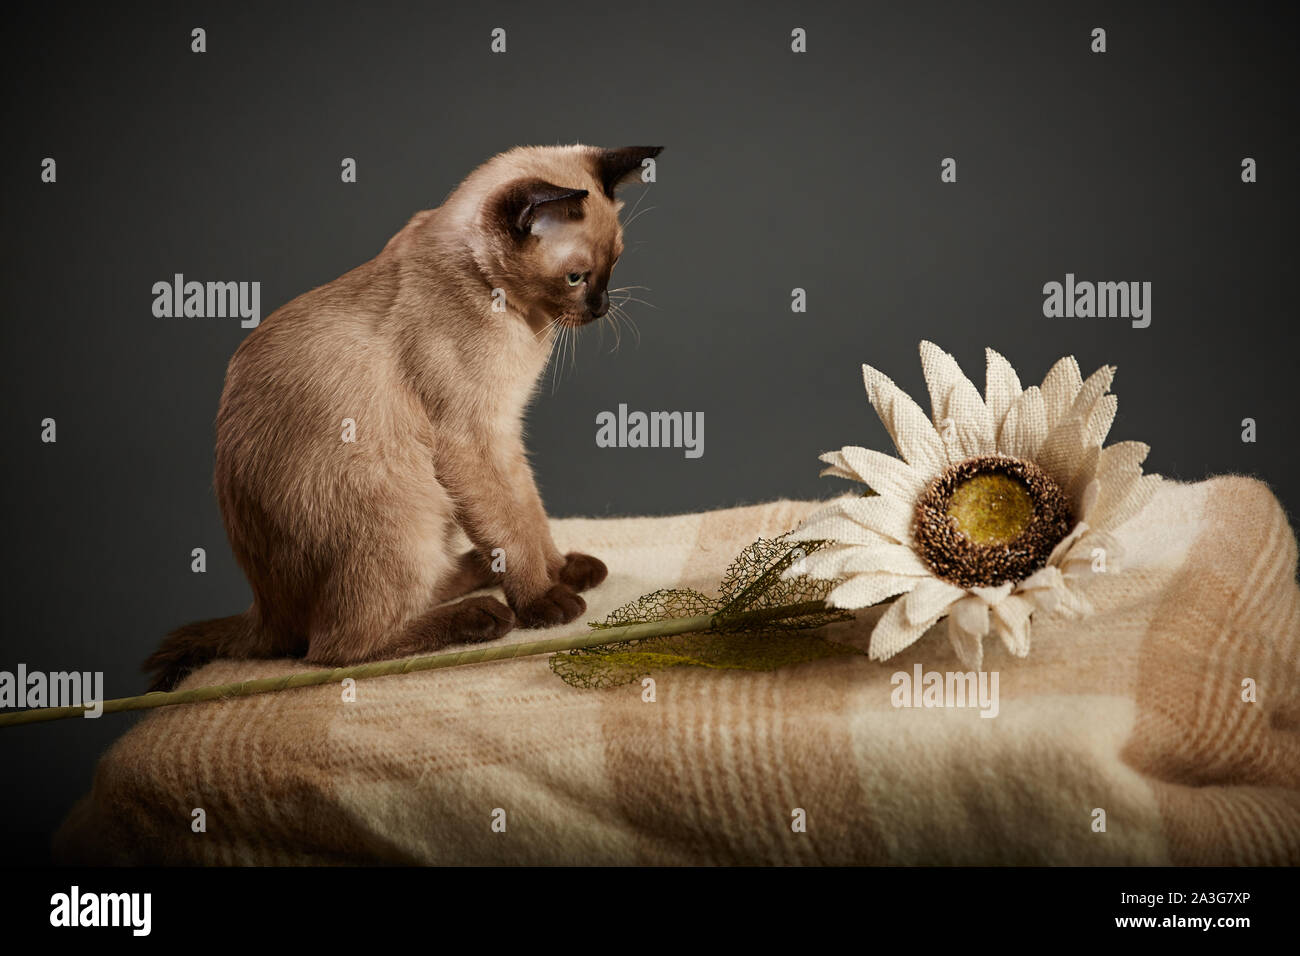 Siamese cat on a blanket playing with a flower Stock Photo